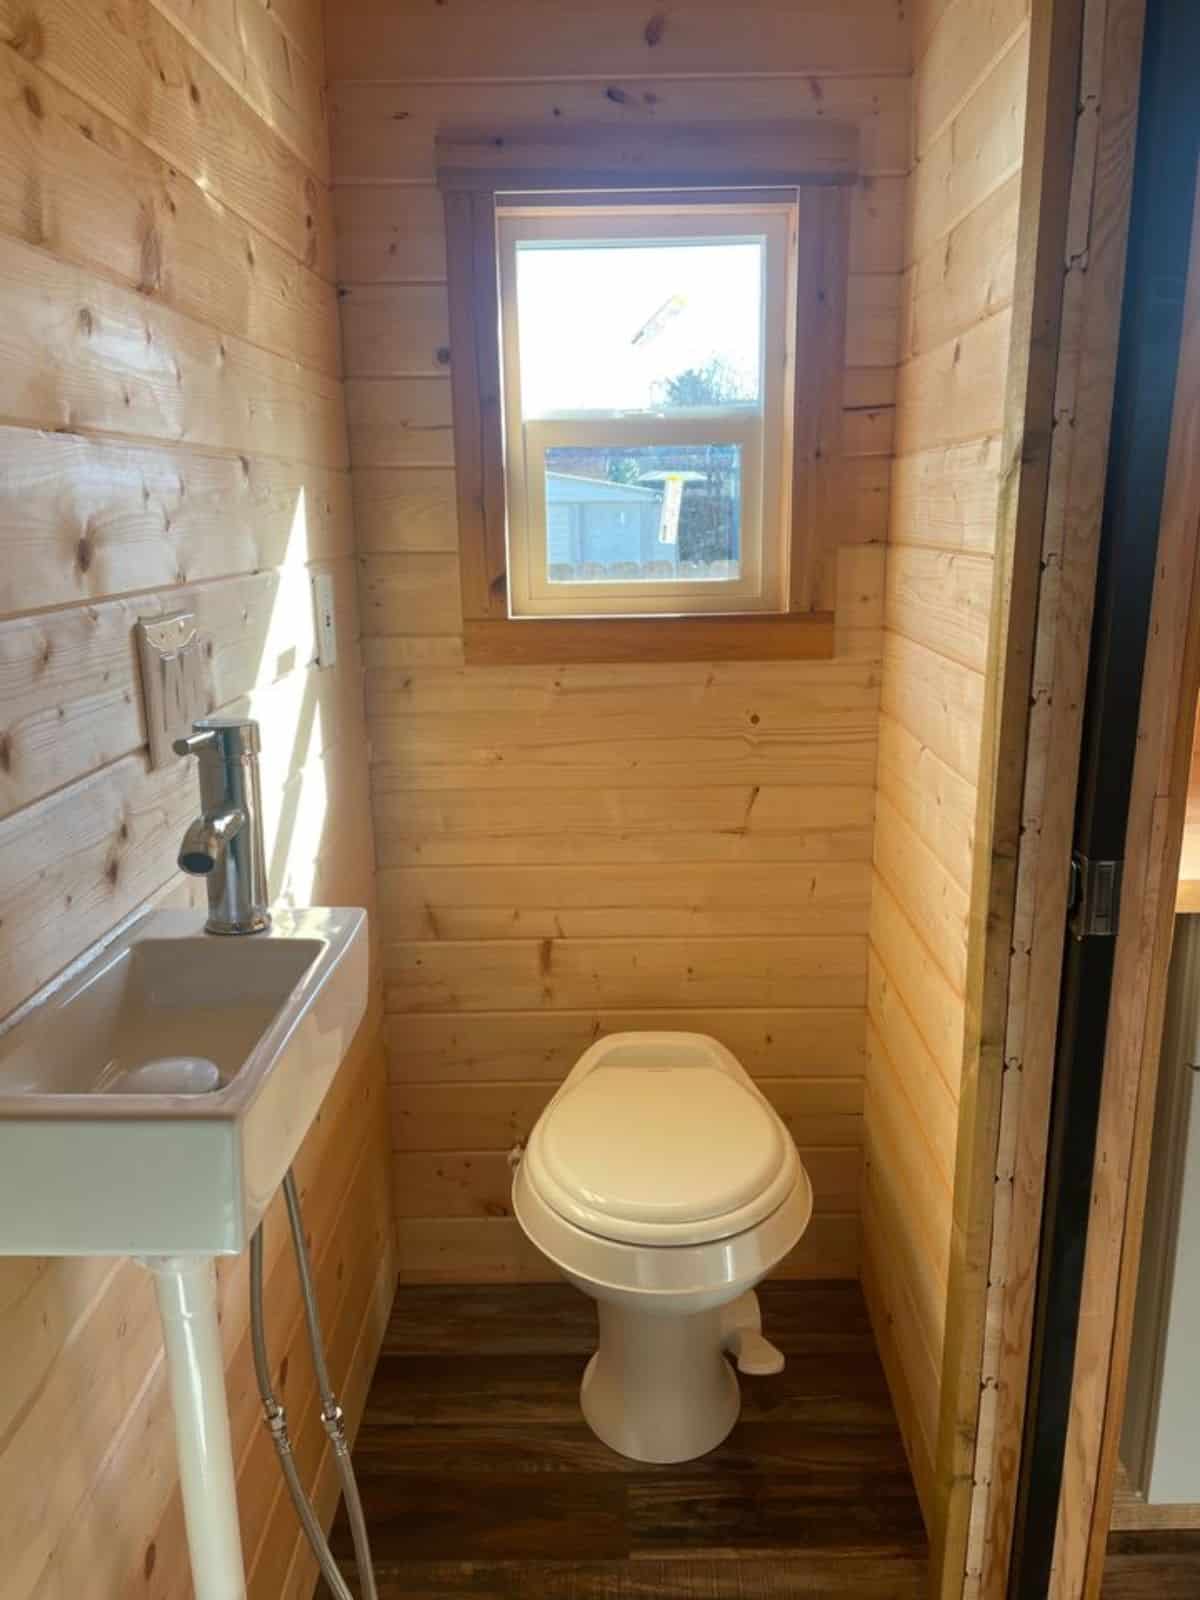 standard toilet, sink and separate shower area in bathroom